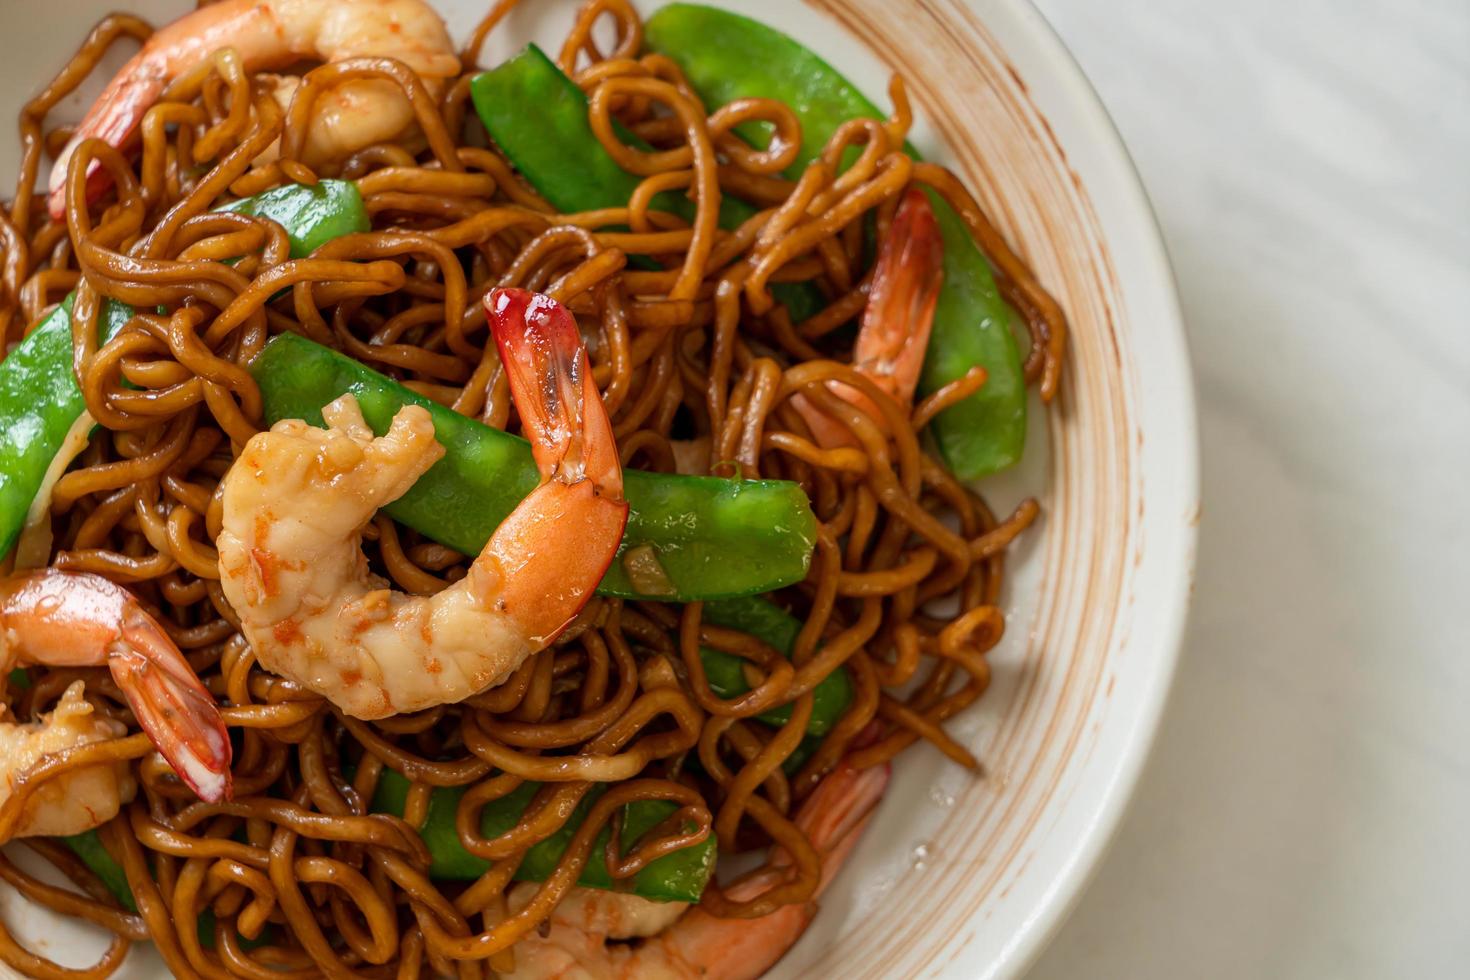 Stir-fried yakisoba noodles with green peas and shrimps - Asian food style photo